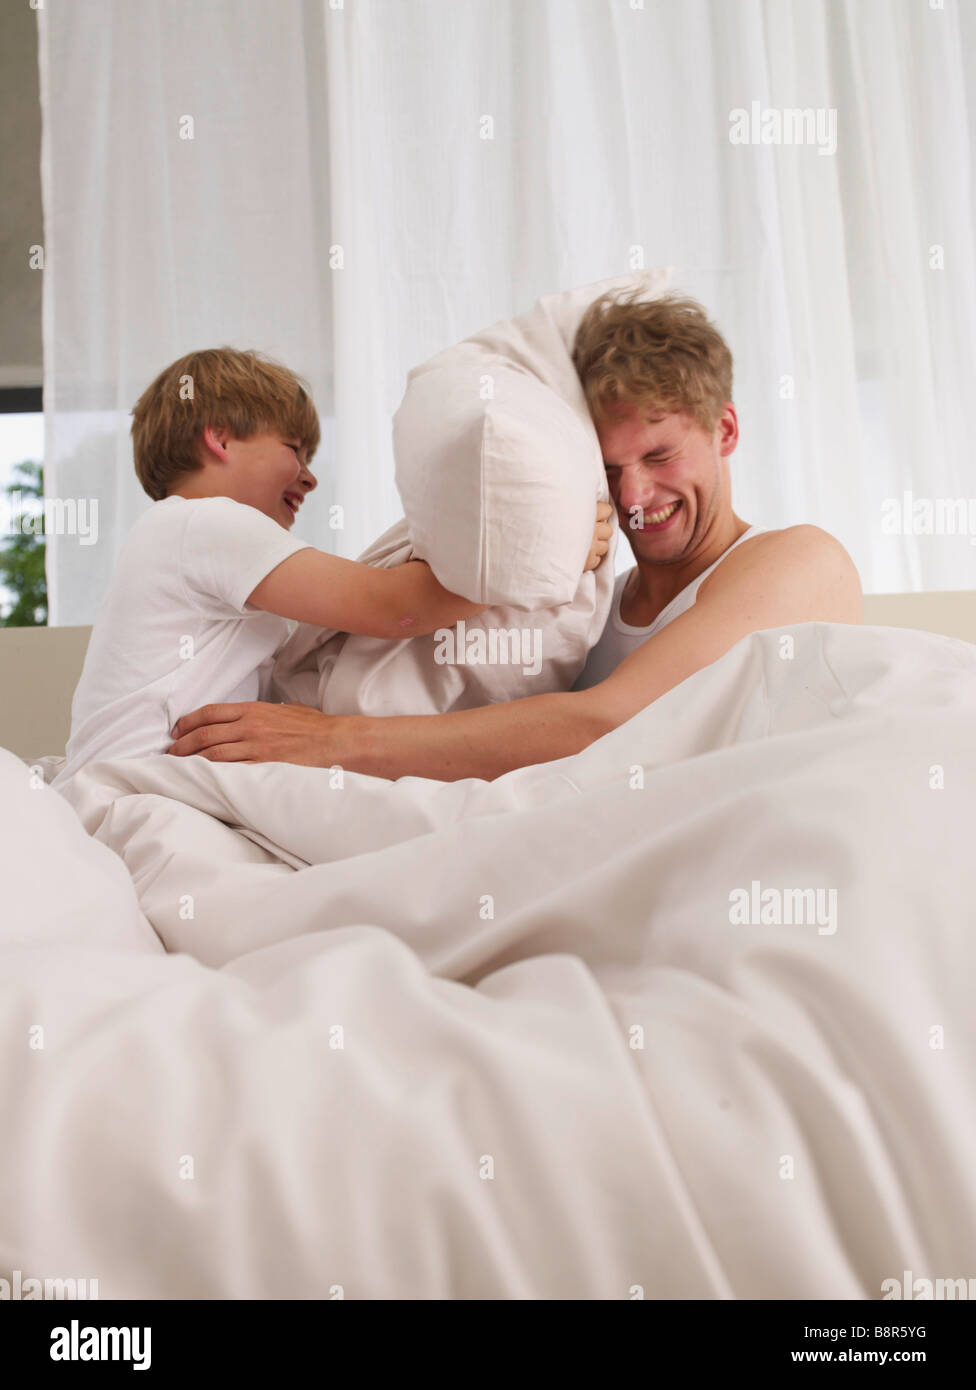 father and son's pillow fight Stock Photo